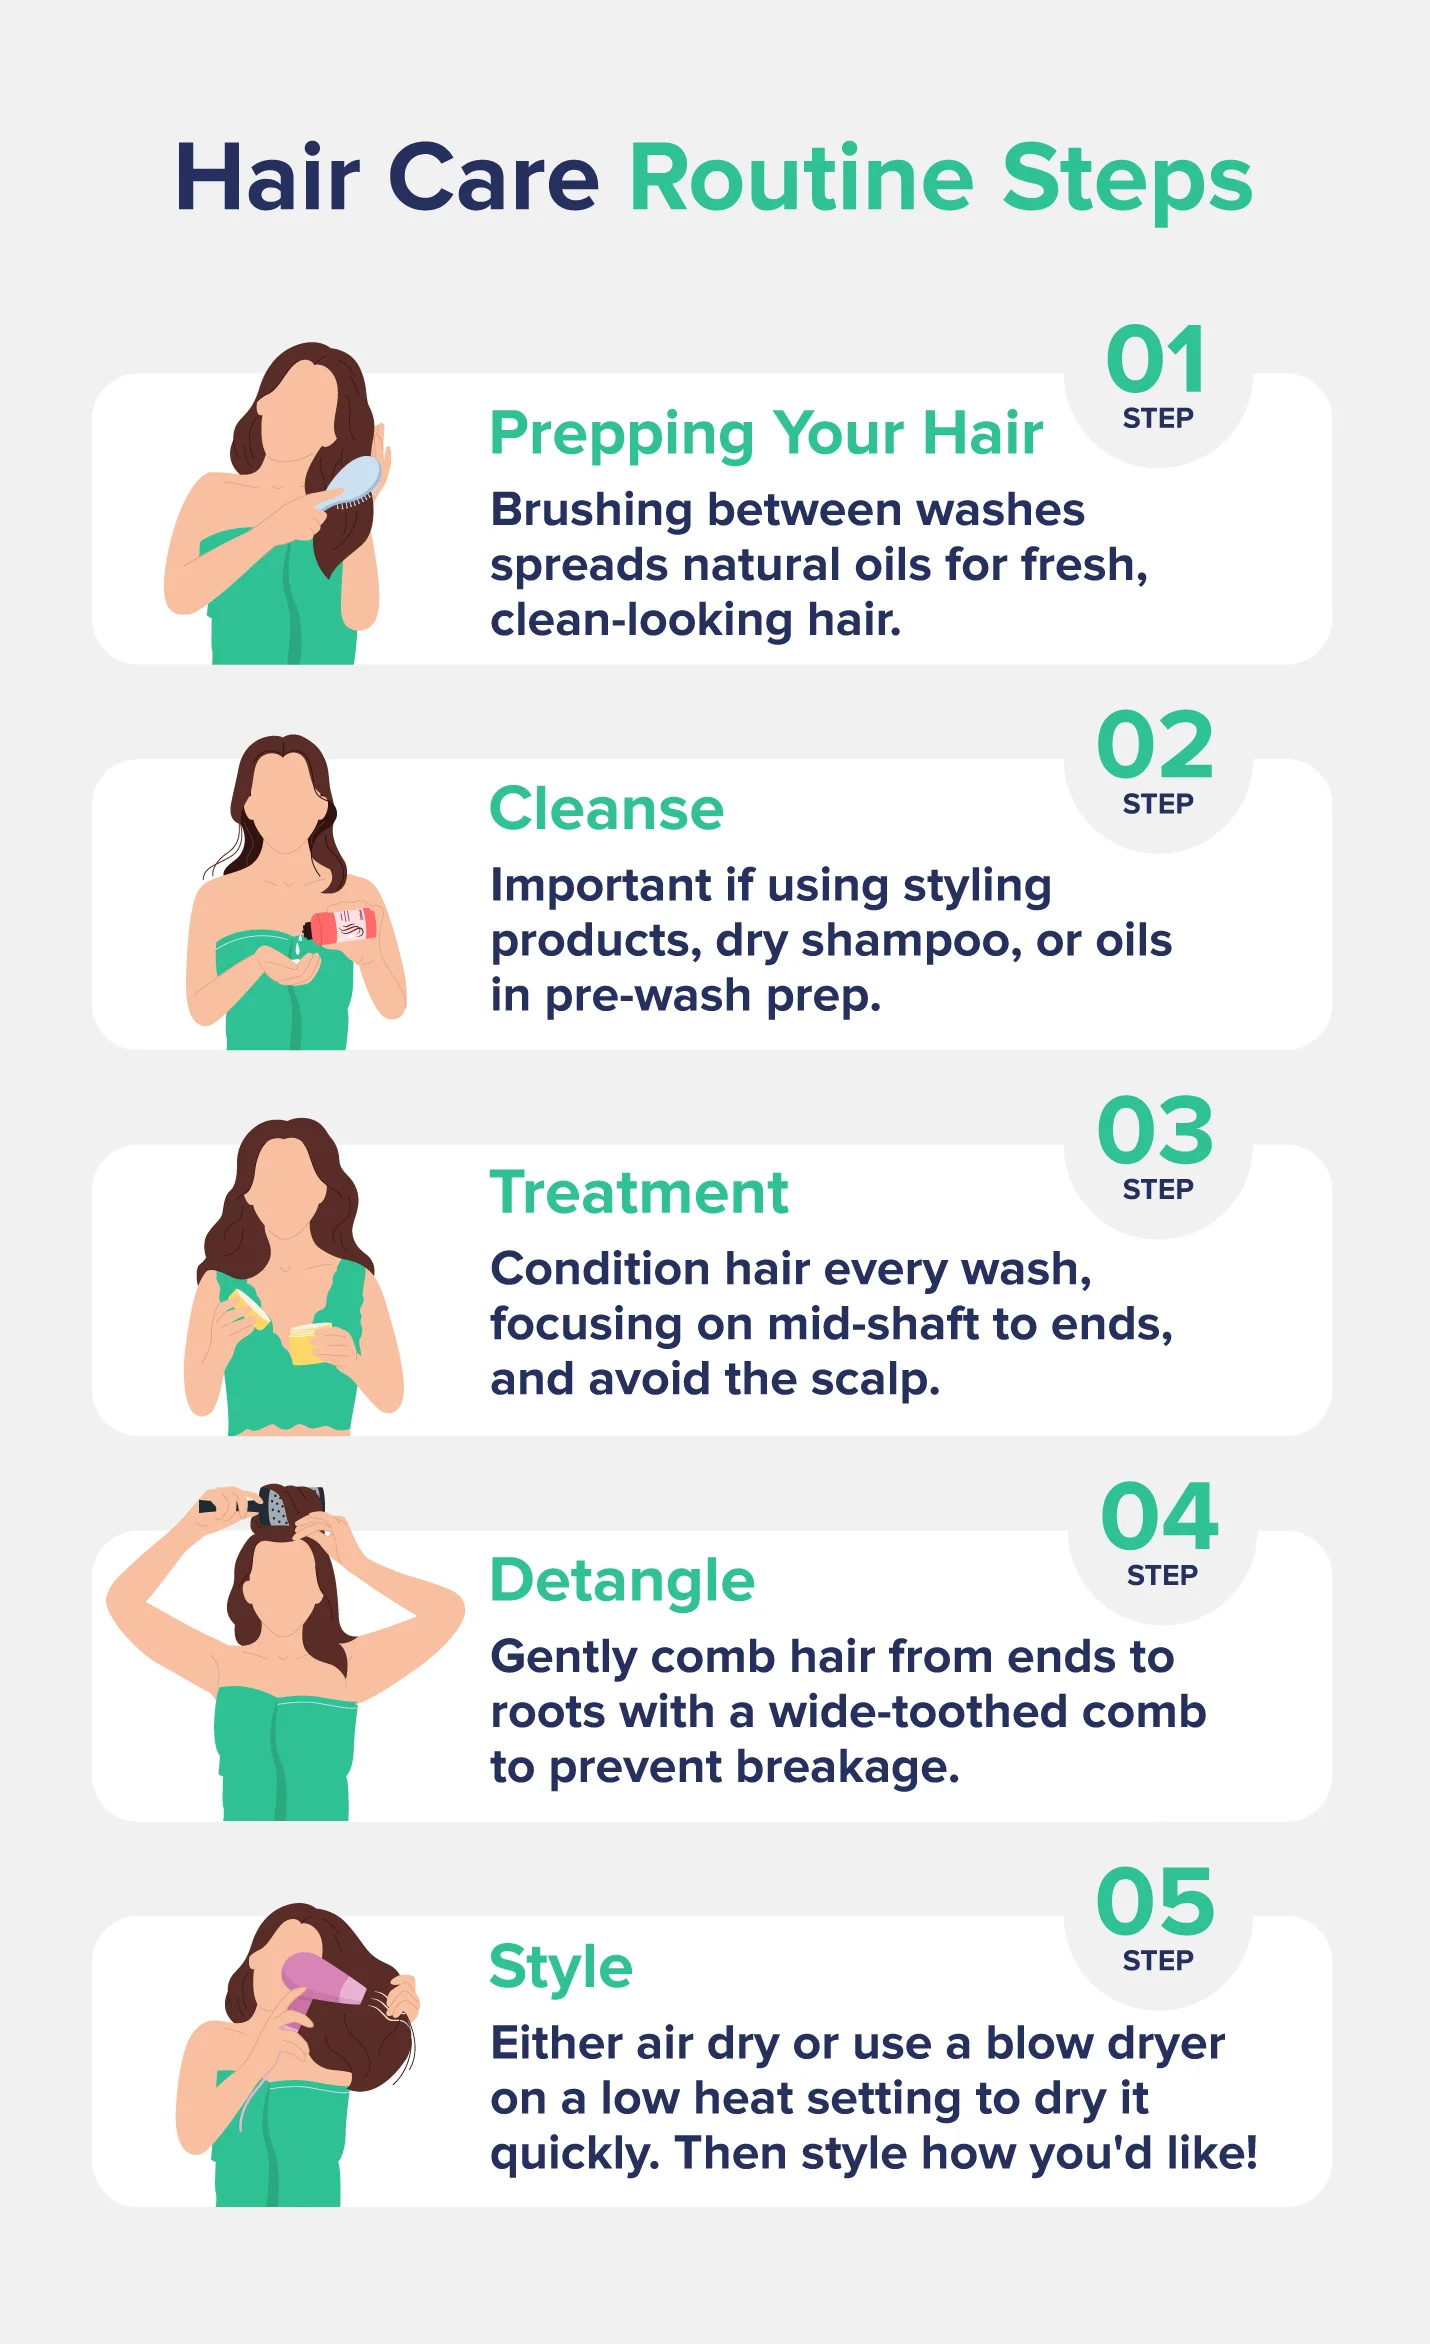 Hair Care Routine StepsStep 1 - Prepping Your HairStep 2 - CleanseStep 3 - TreatmentStep 4 - Detangle Step 5 - Style 